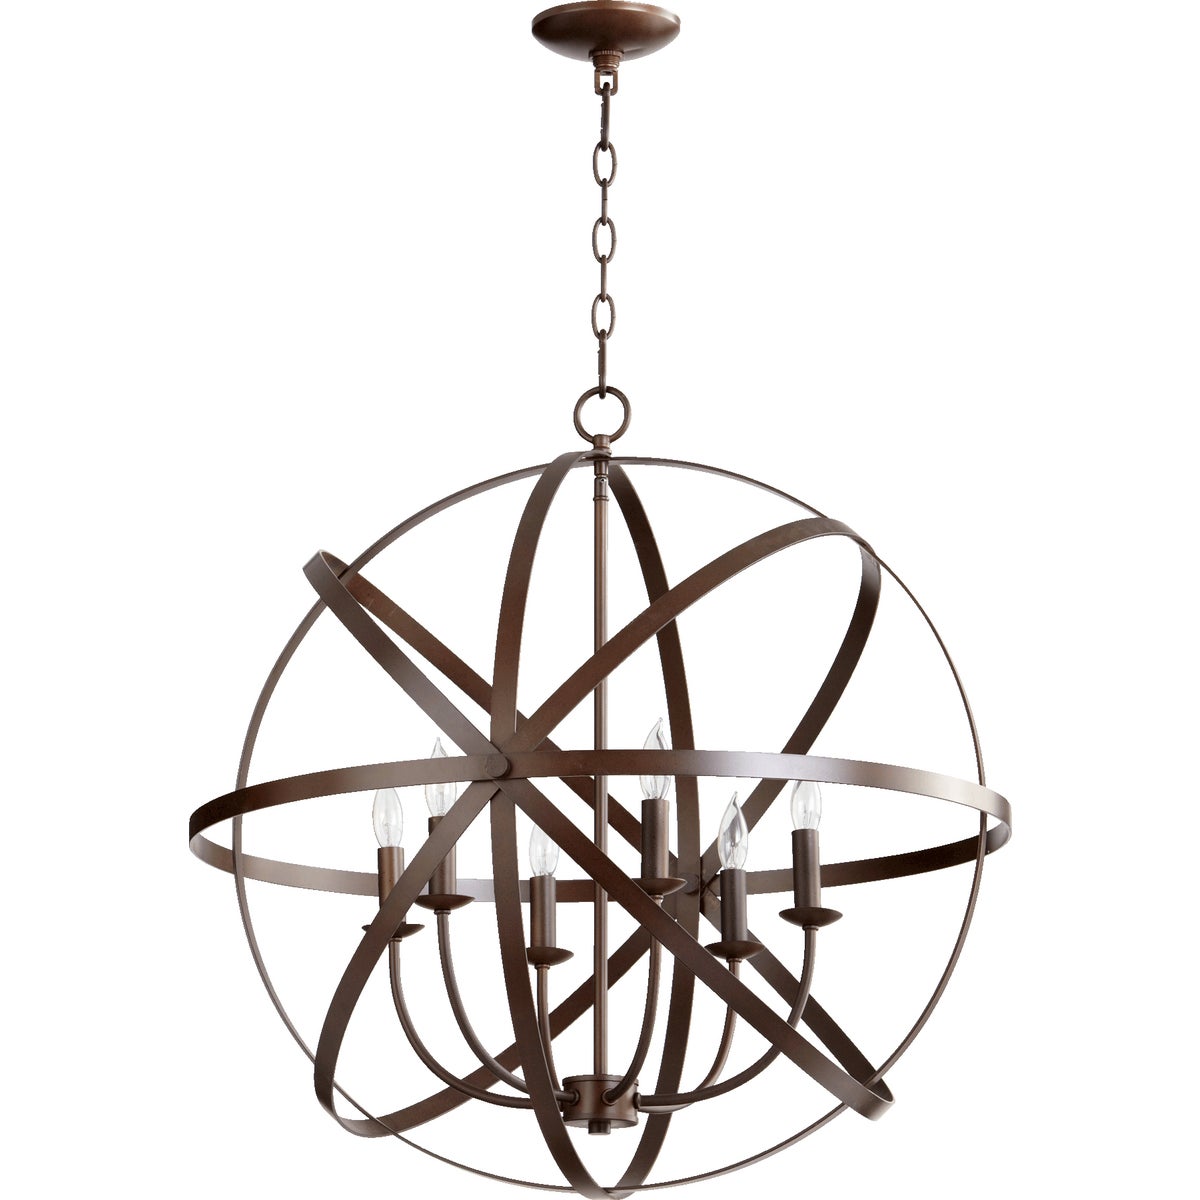 A modern sphere chandelier with metal rings and candelabra lights, perfect for brightening any space. Brand: Quorum International.